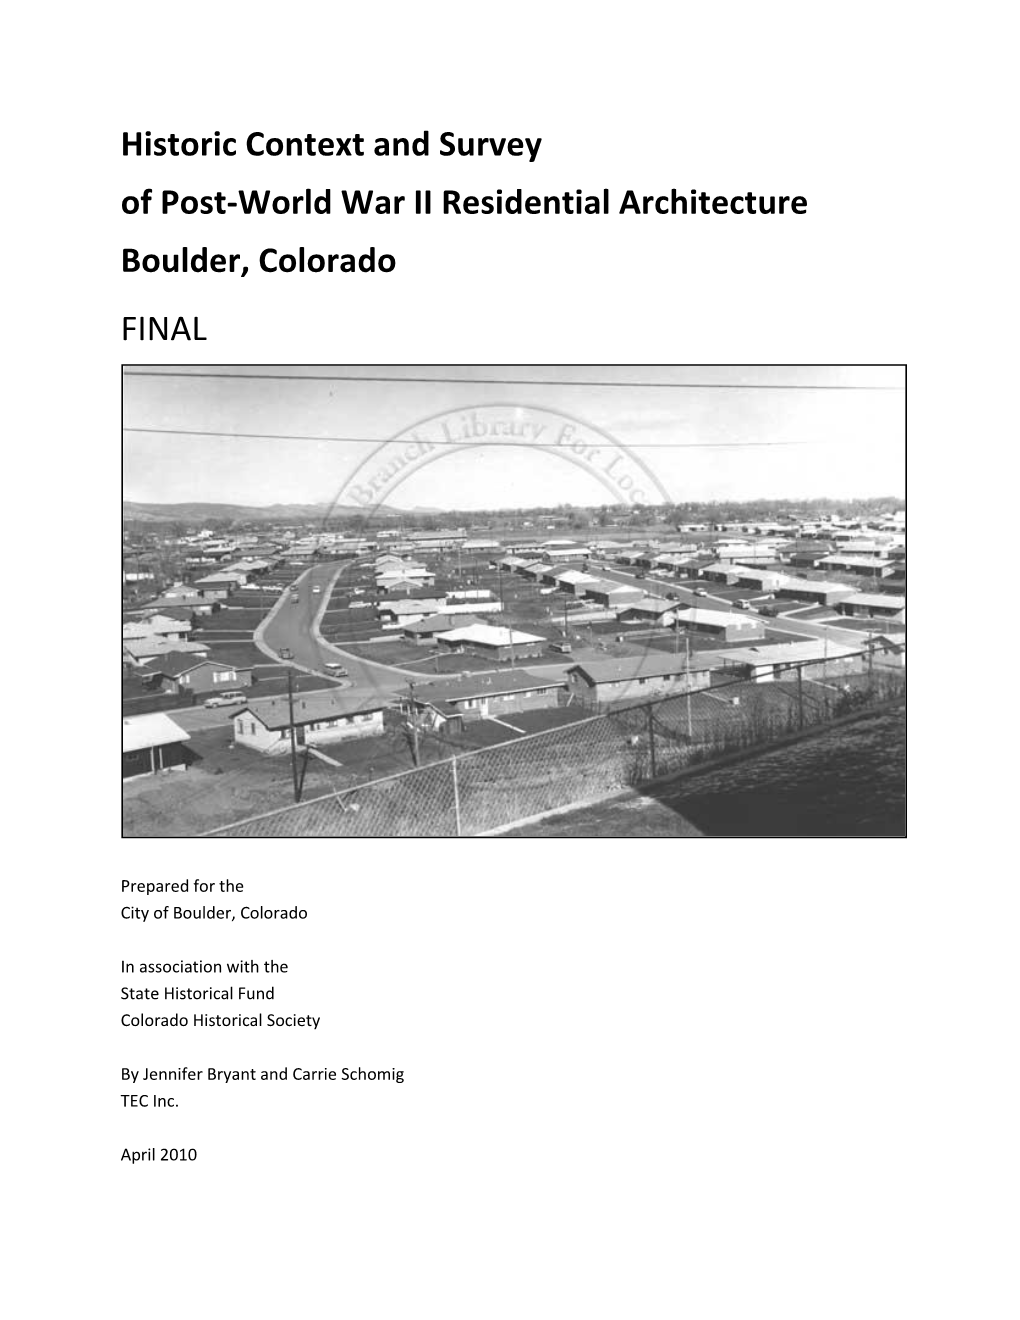 Historic Context and Survey of Post-World War II Residential Architecture Boulder, Colorado FINAL